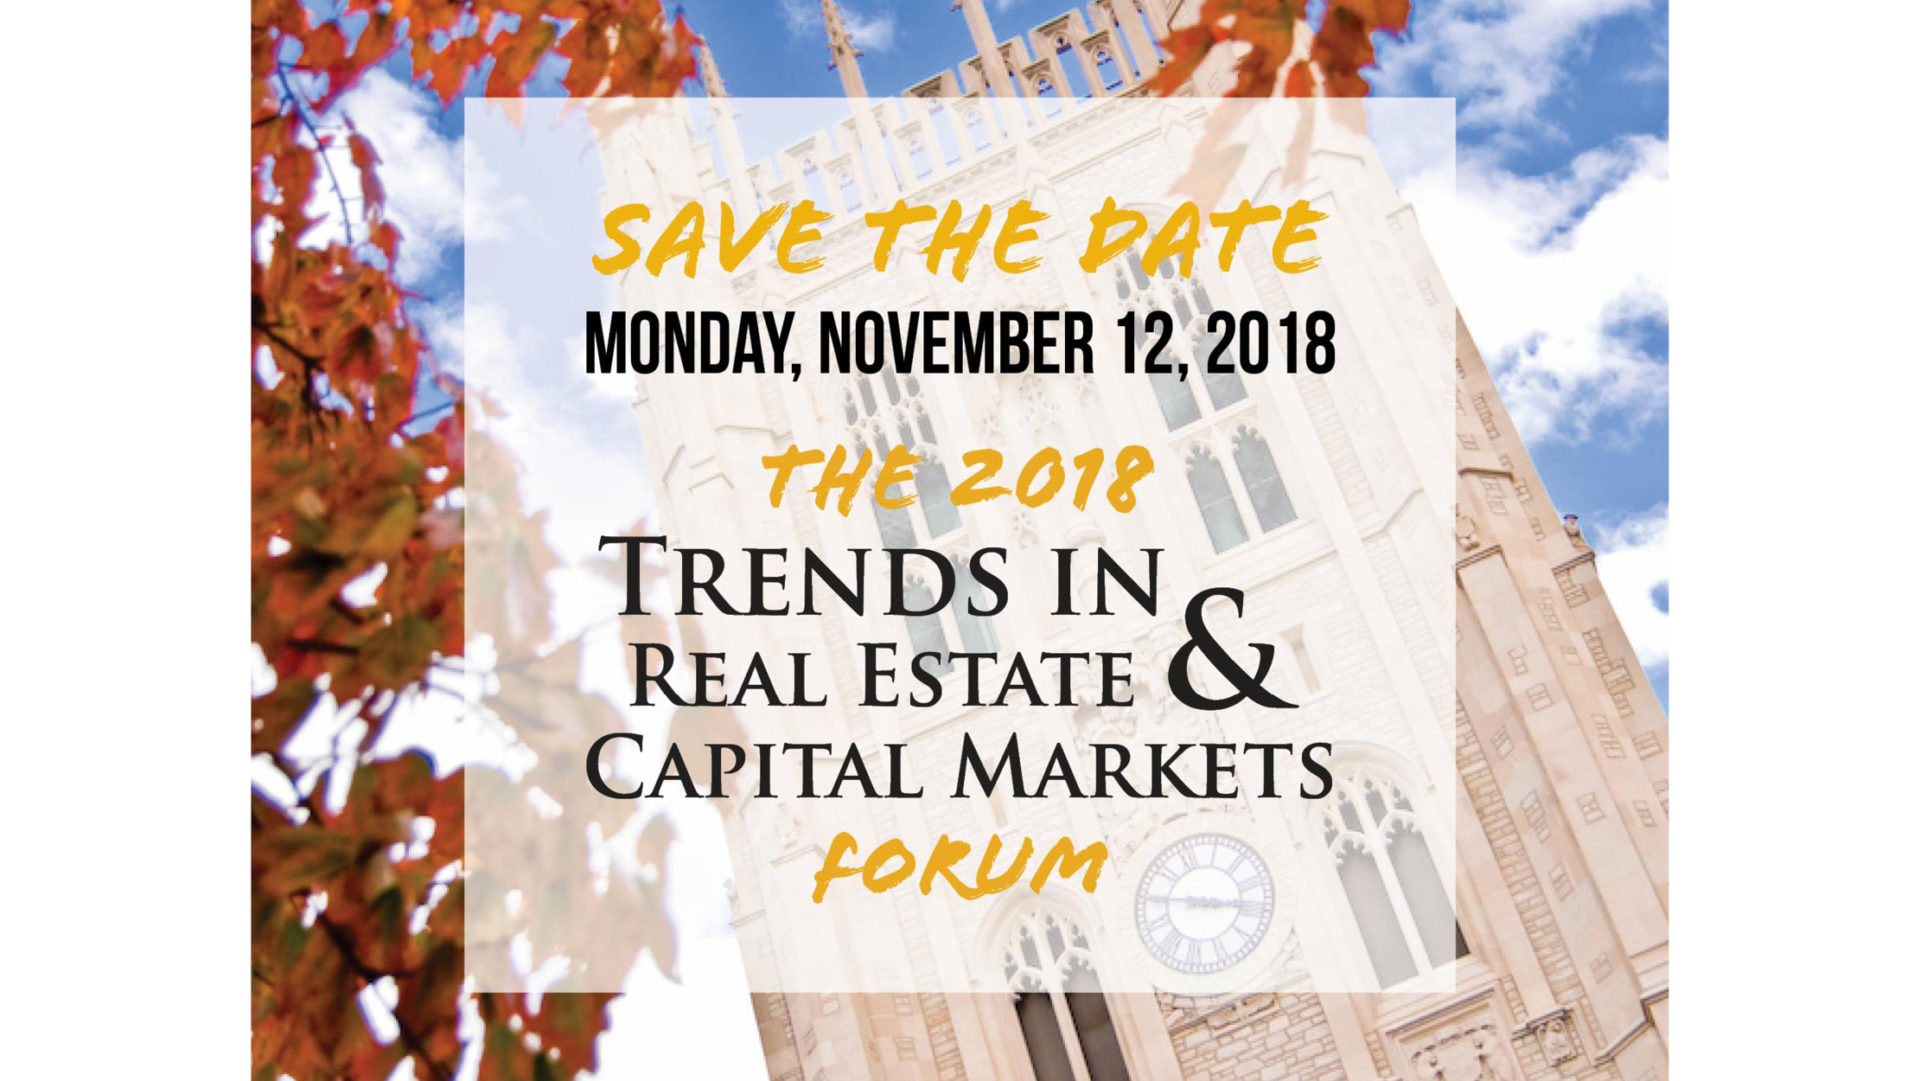 On Monday, November 12, 2018, the annual Trends in Real Estate & Capital Markets Forum, hosted by the University of Missouri Trulaske College of Business and the Jeffrey E. Smith Institute of Real Estate and Capital Markets, will take place at the University of Missouri.